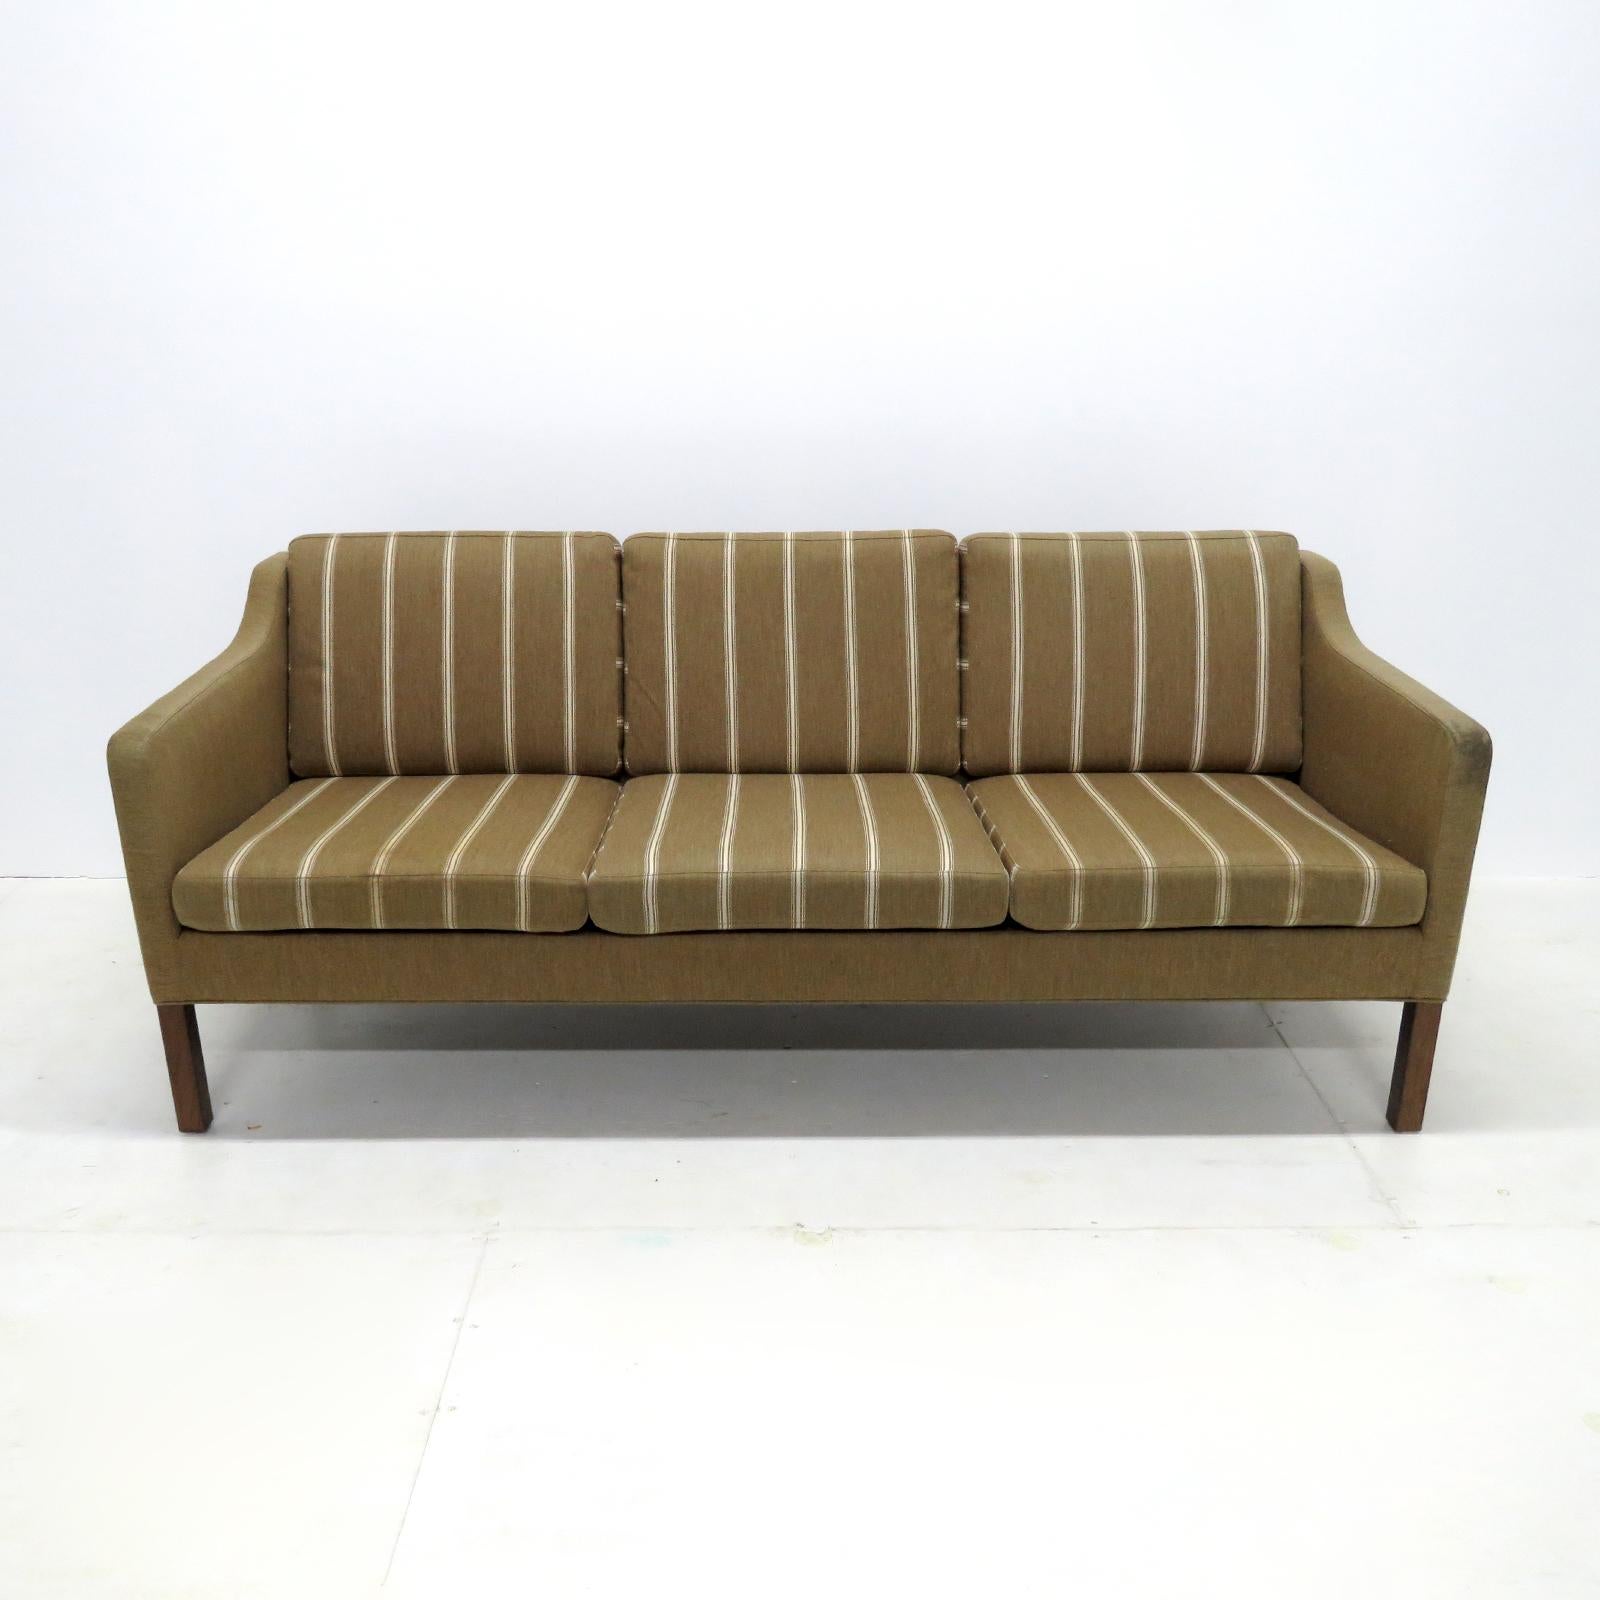 Stunning three-seat sofa model no. 2223, designed by Børge Mogensen in 1963 and produced by Frederica Stolefabrik, Denmark, in original mustard green wool with white/beige stripes on dark stained wood legs, marked.